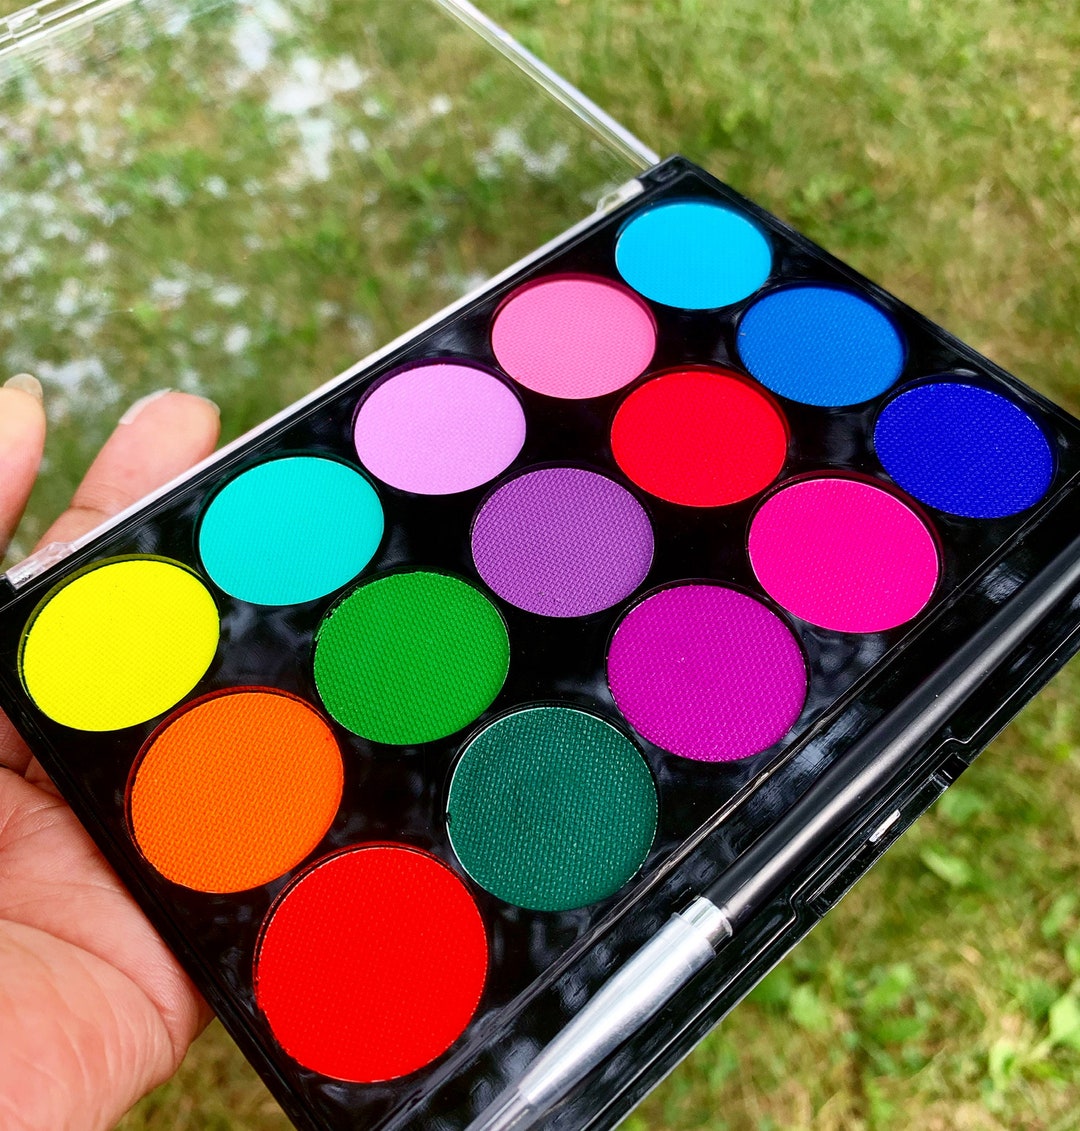 Suroskie Beauty on Instagram: Water Activated Eyeliner Palette- Activate  these liners by mixing them with a drop of water and applying them with a  wet brush. So bright and edgy, perfect liners!